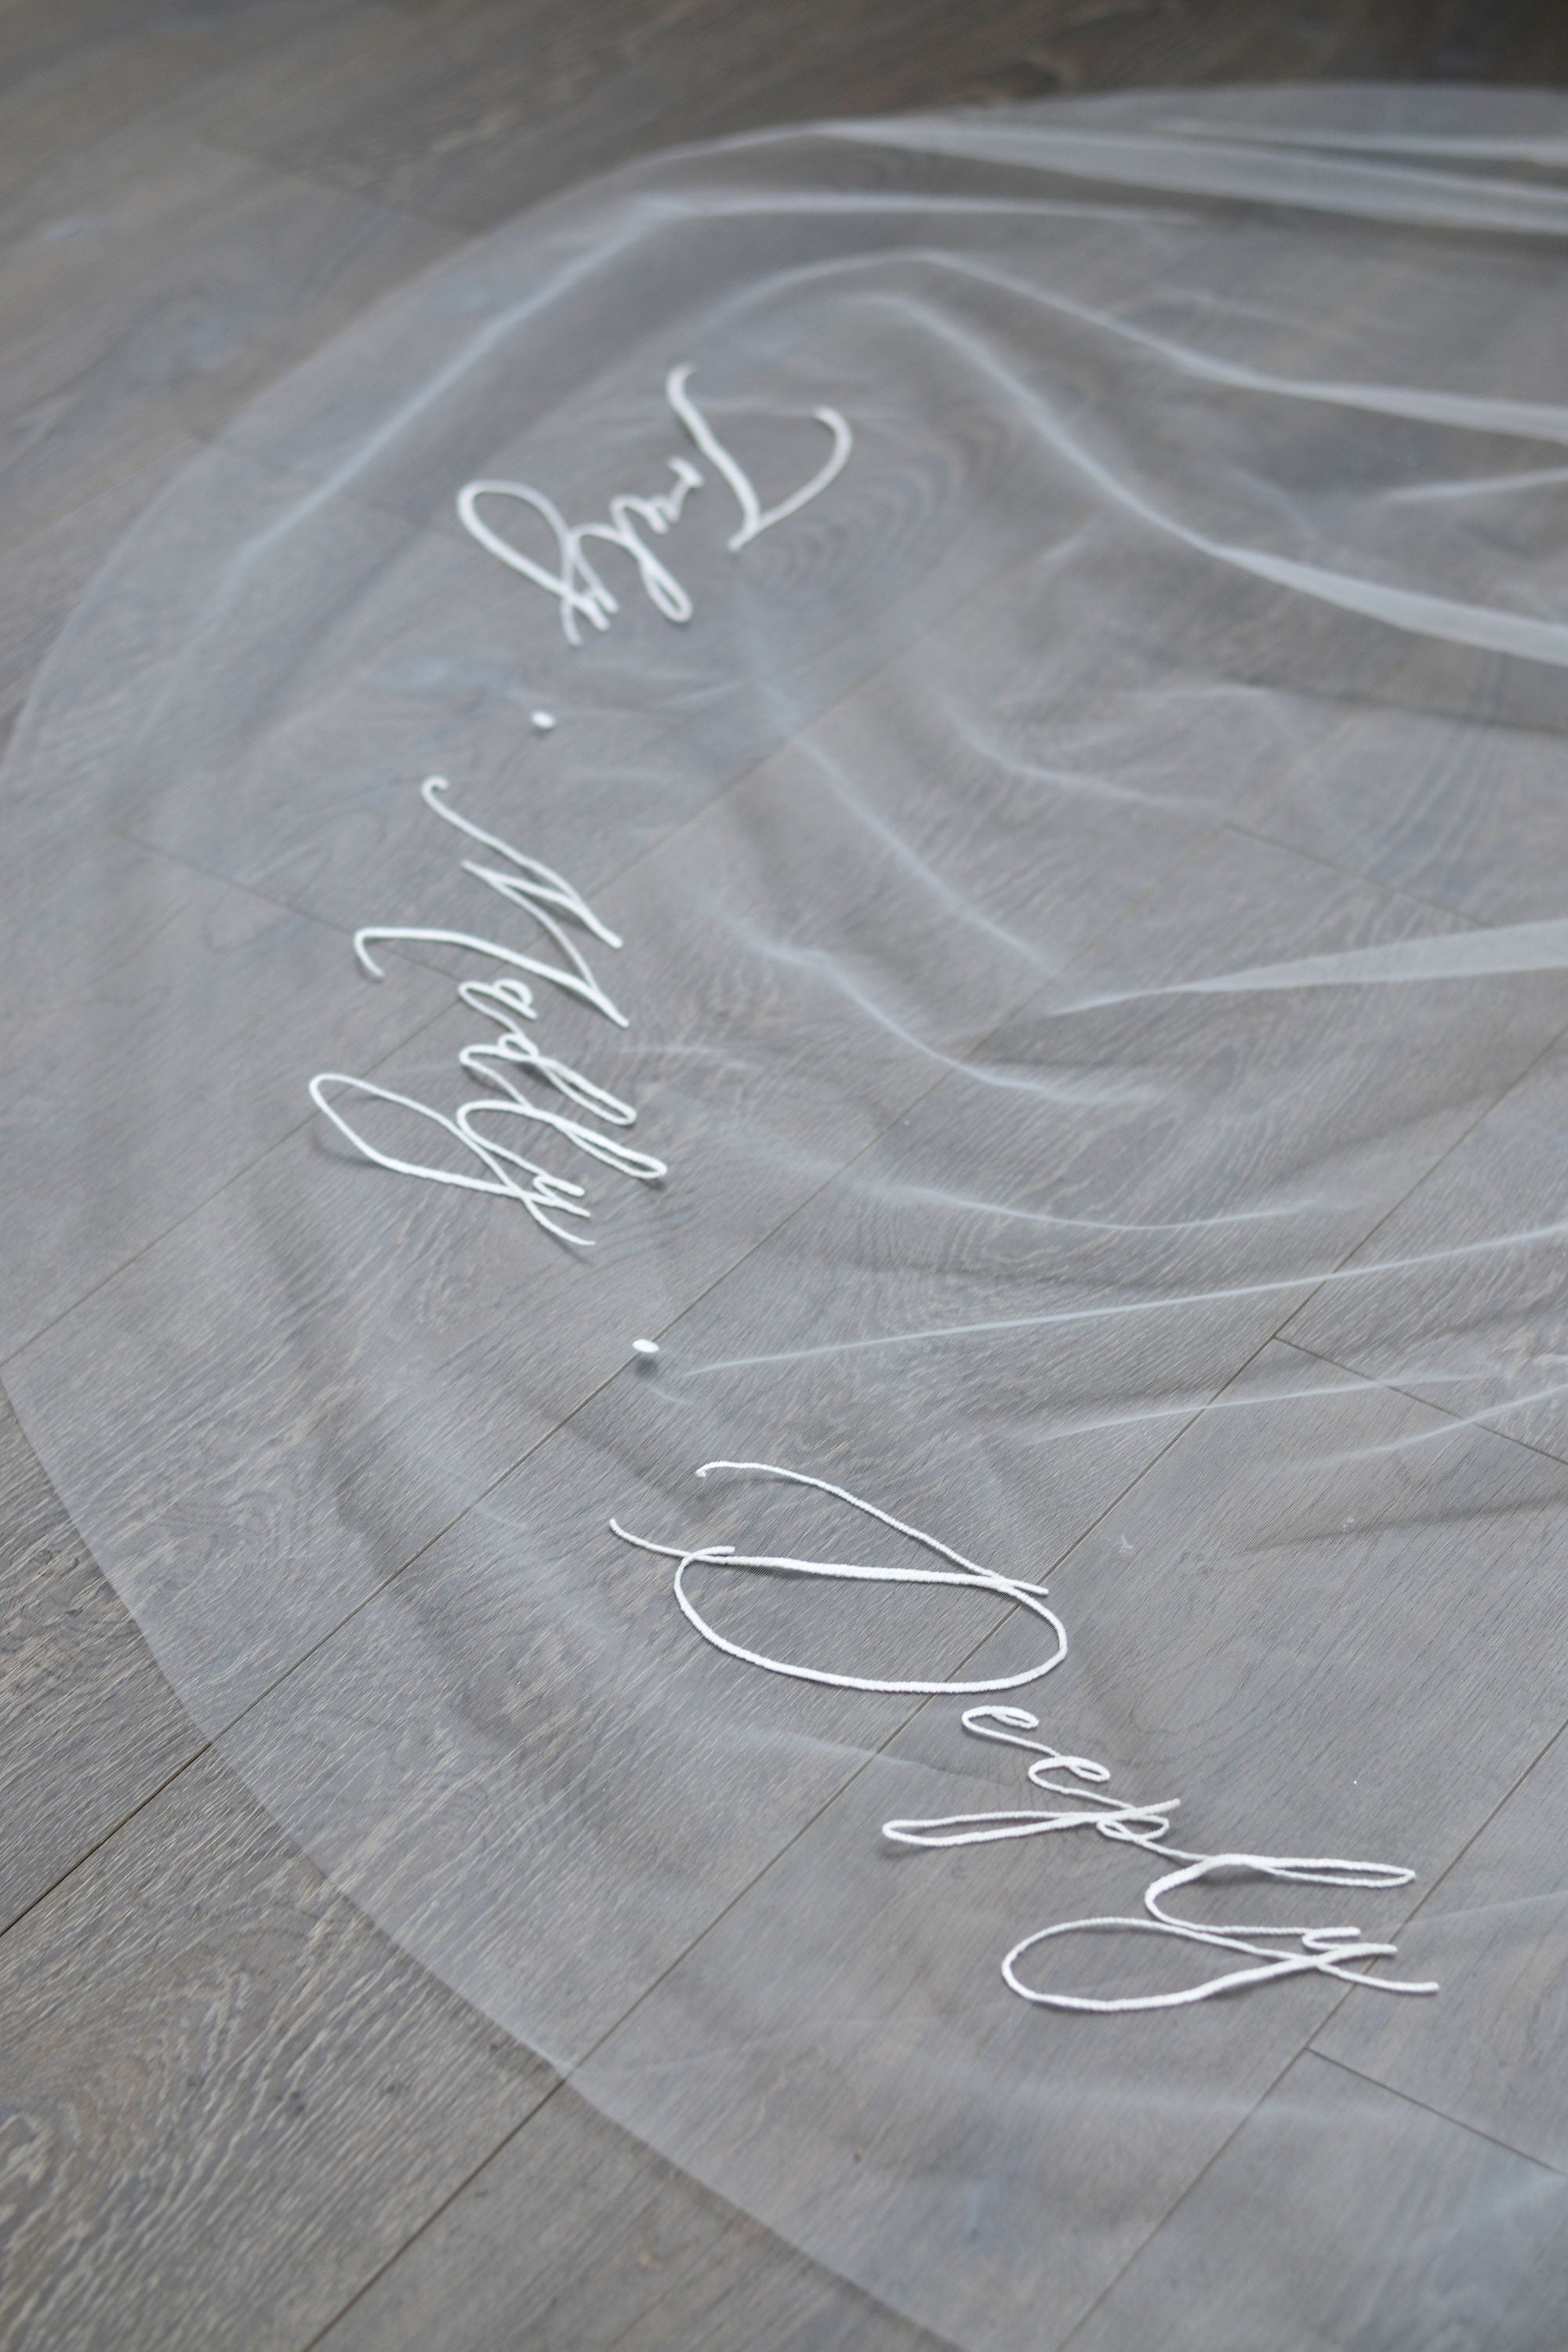 TRULY, MADLY, DEEPLY | Embroidered Veil